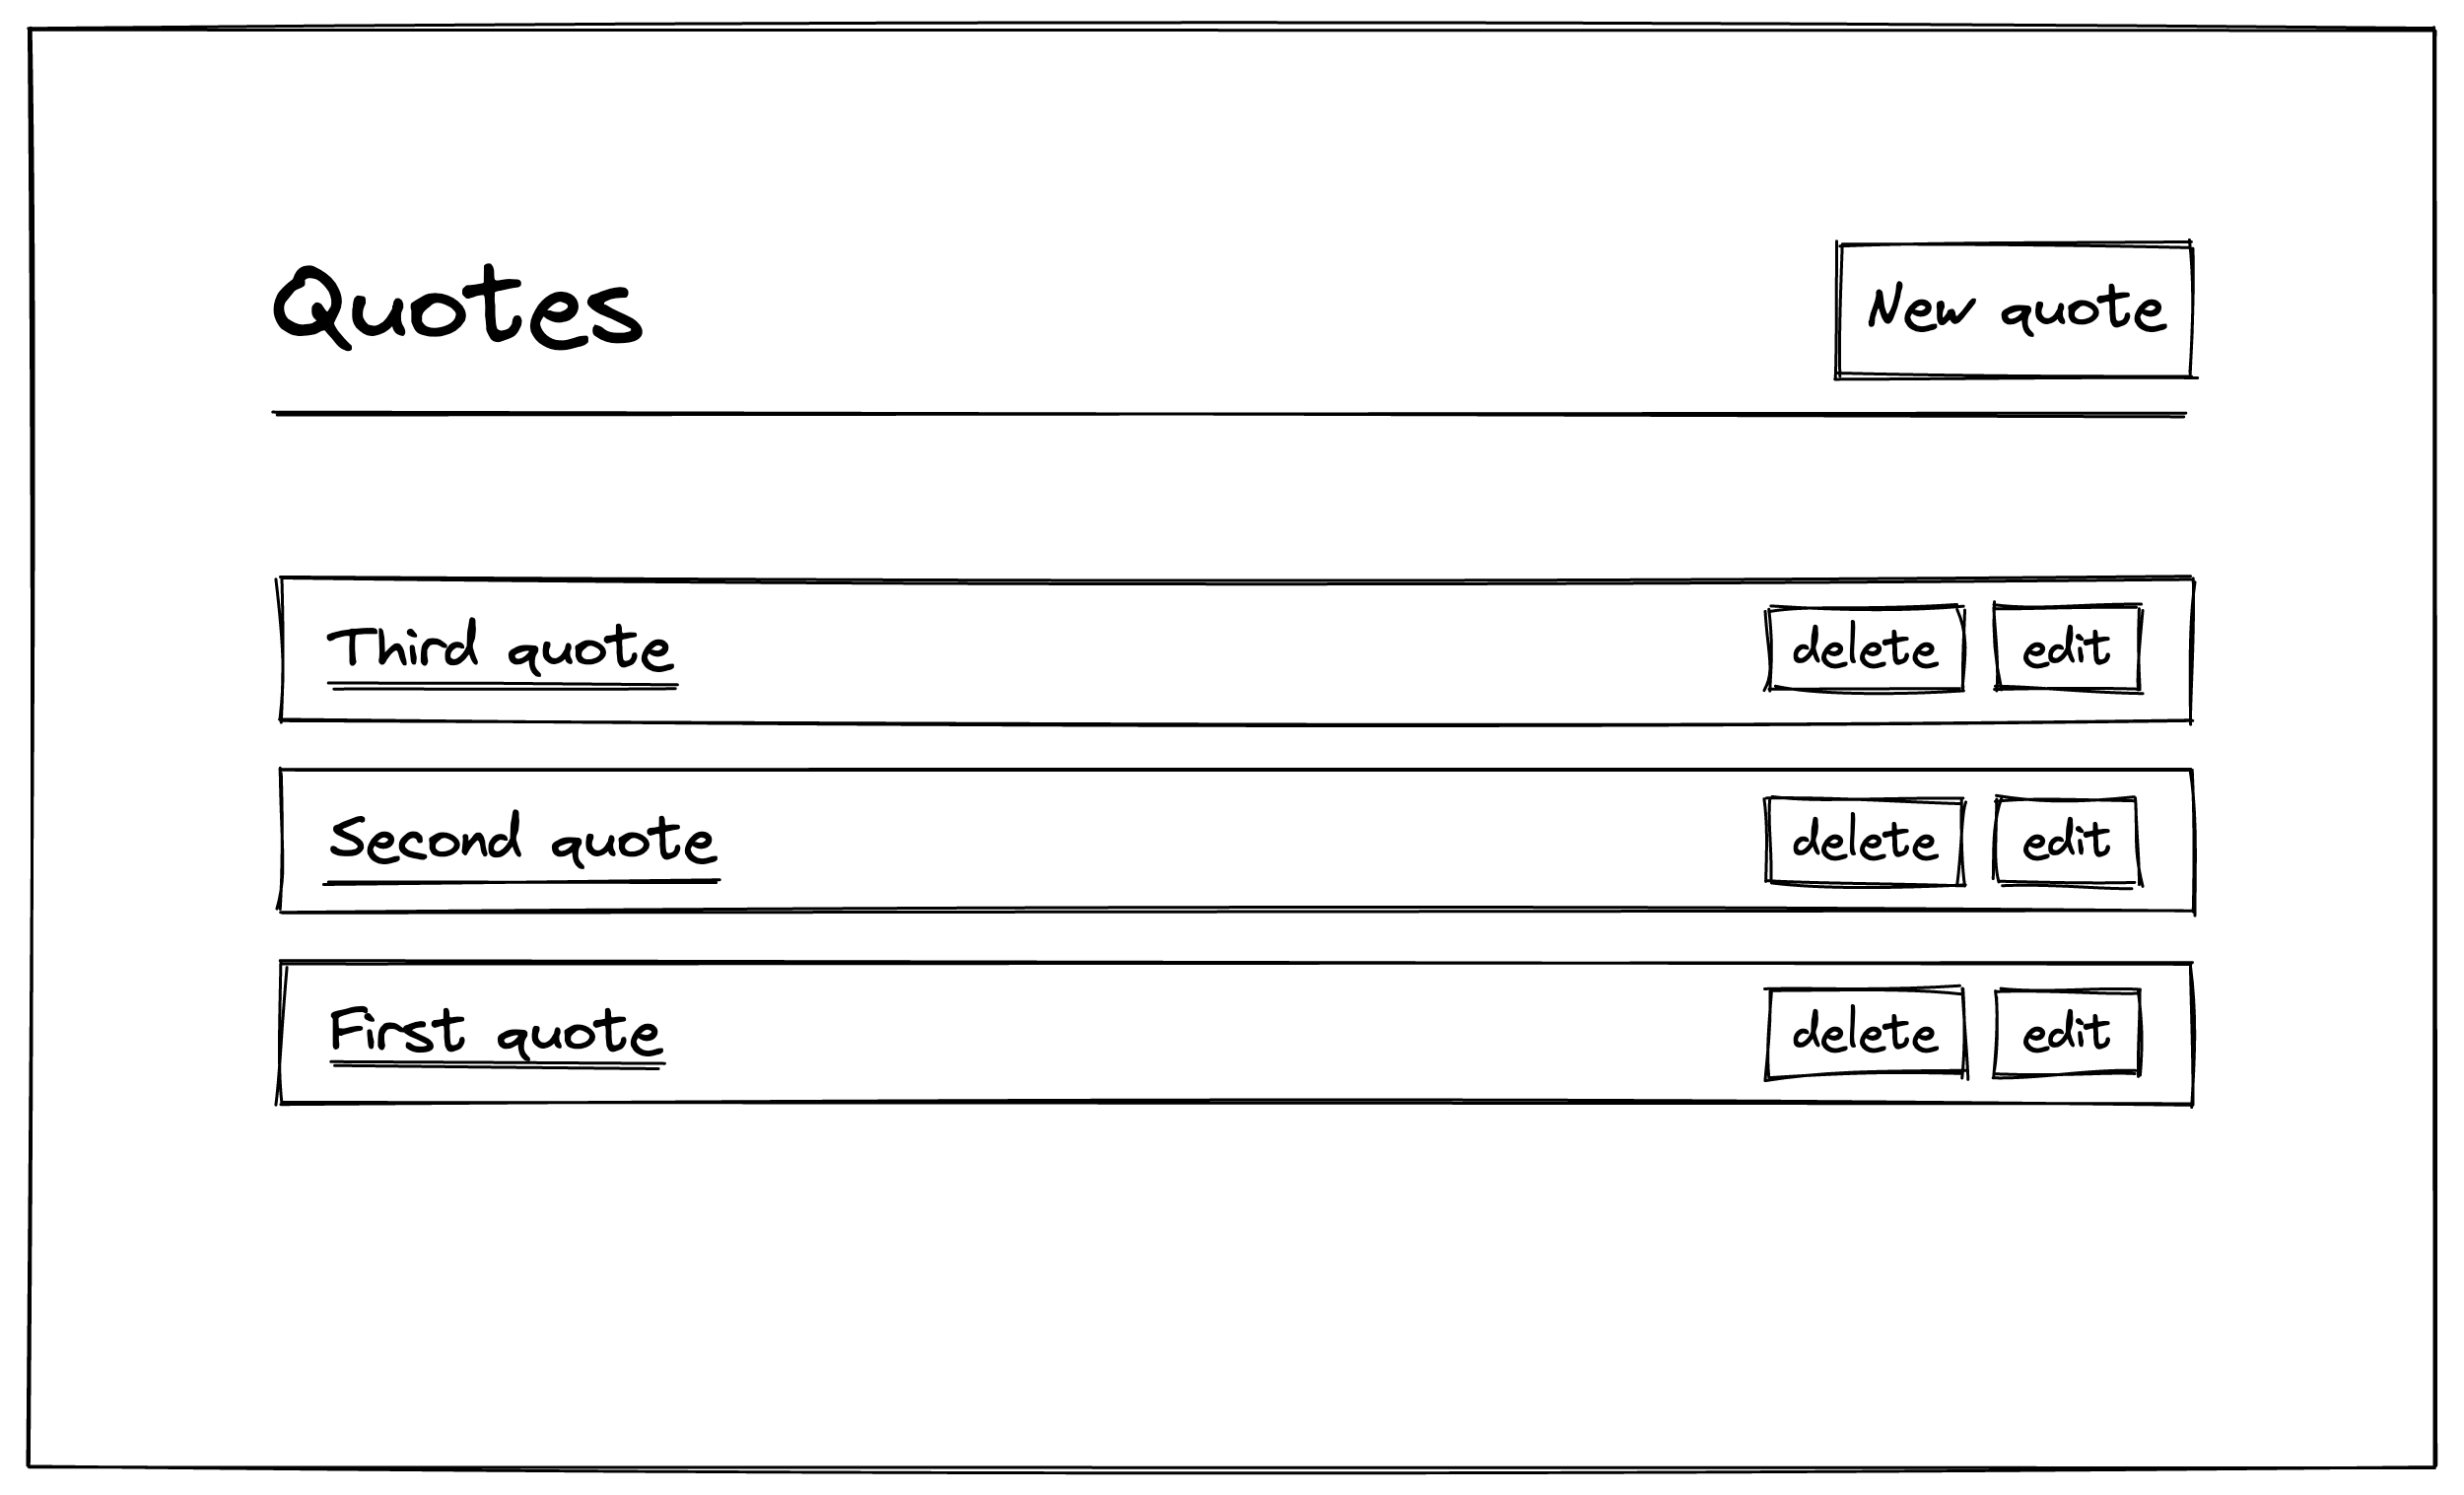 The sketch of the quotes index page